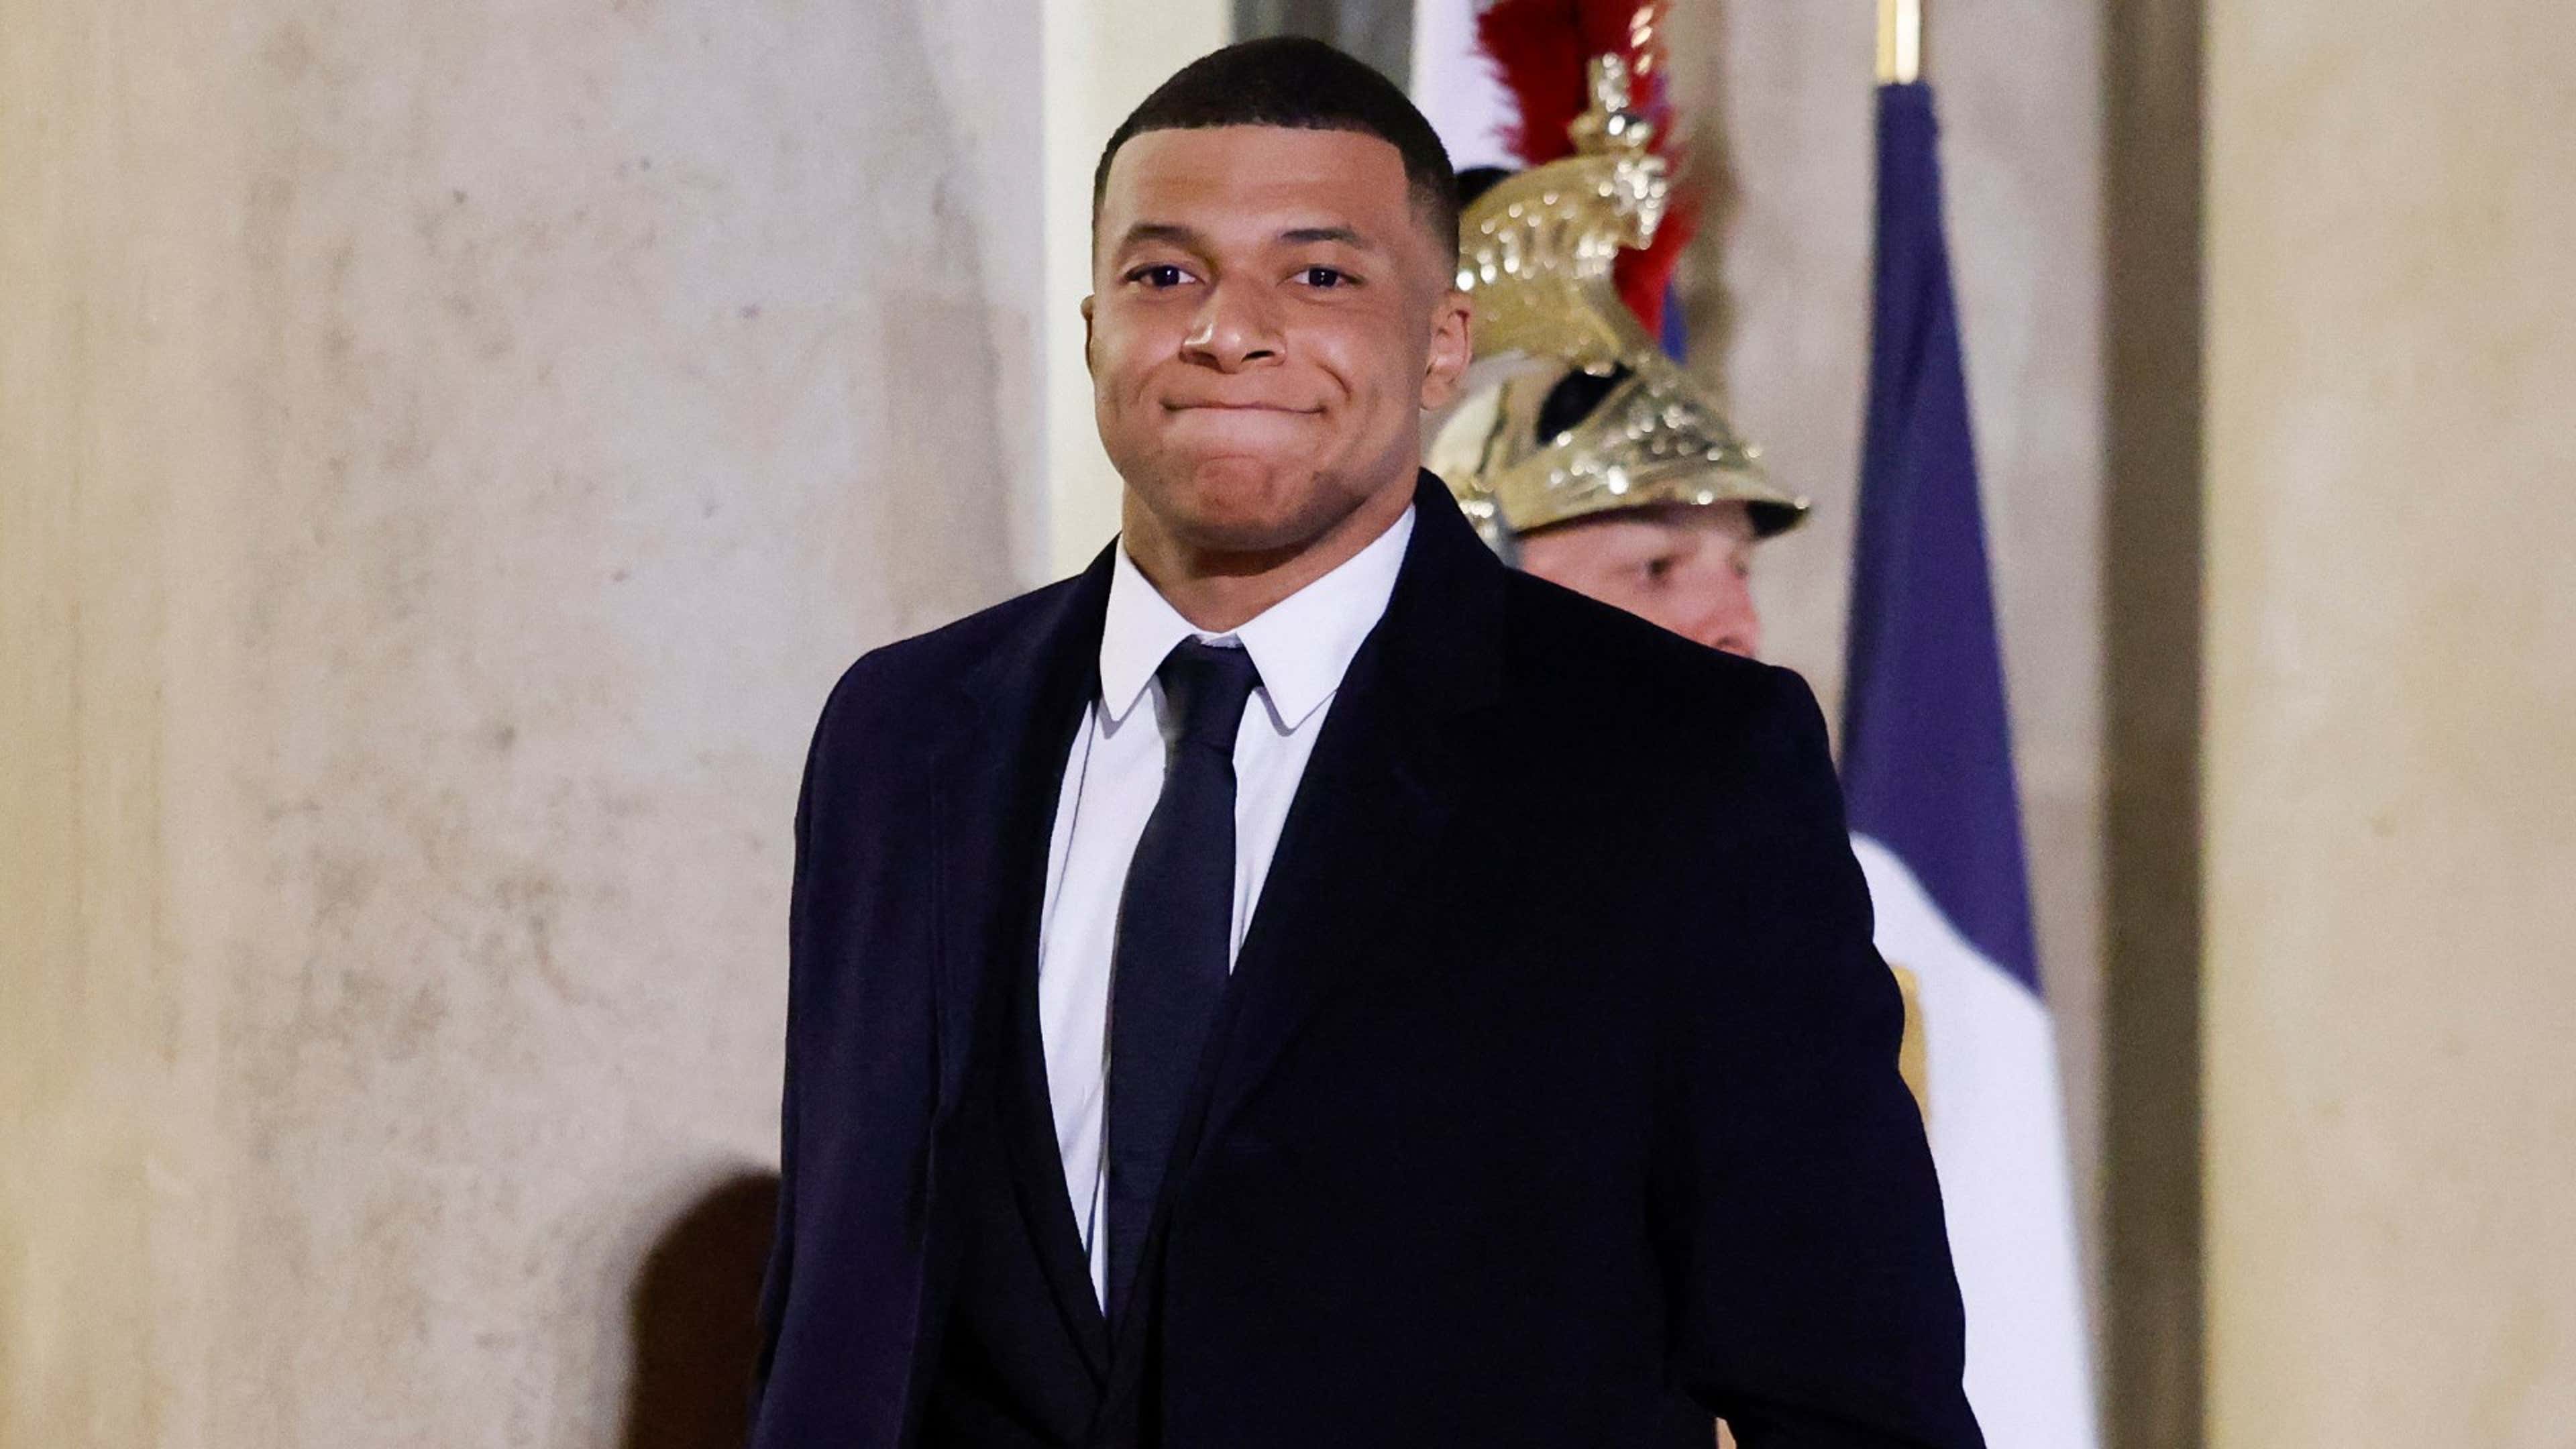 It's not real news' - Campos issues emphatic denial of Mbappe PSG